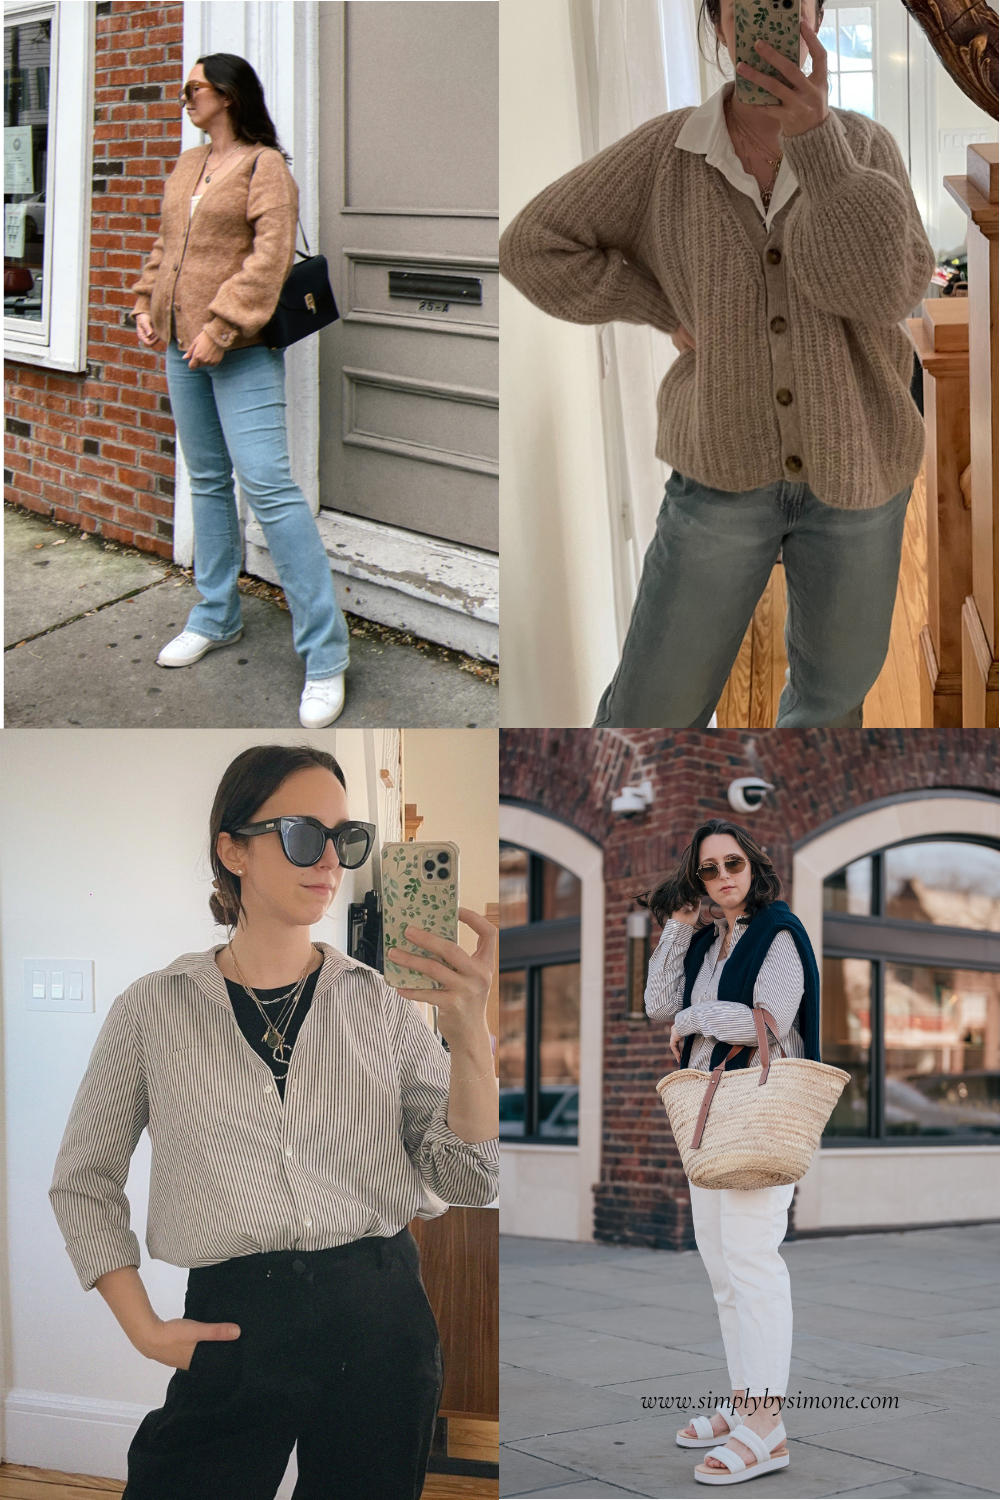 4 Layering Outfit Ideas, Four Different Ways To Layer Your Clothes, Ideas 1-4